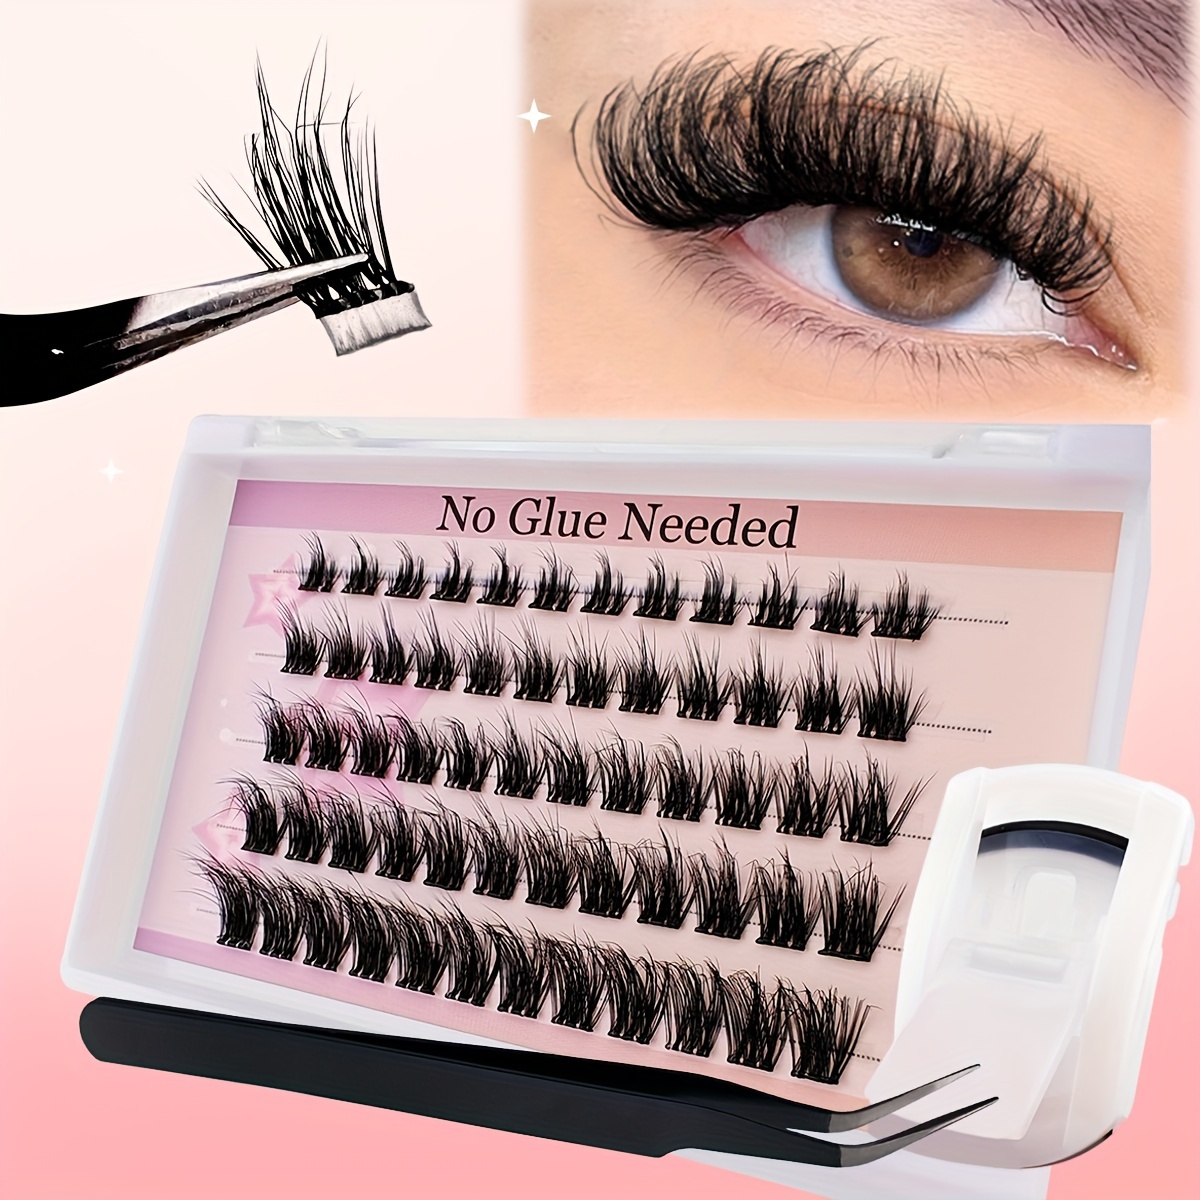 

Easy-apply Self-adhesive Eyelash Kit - 60 Pcs, No Glue Needed, Diy Lash Extensions With Tweezers & Curler, Natural To Fluffy Looks, C-, 8-16mm Mix